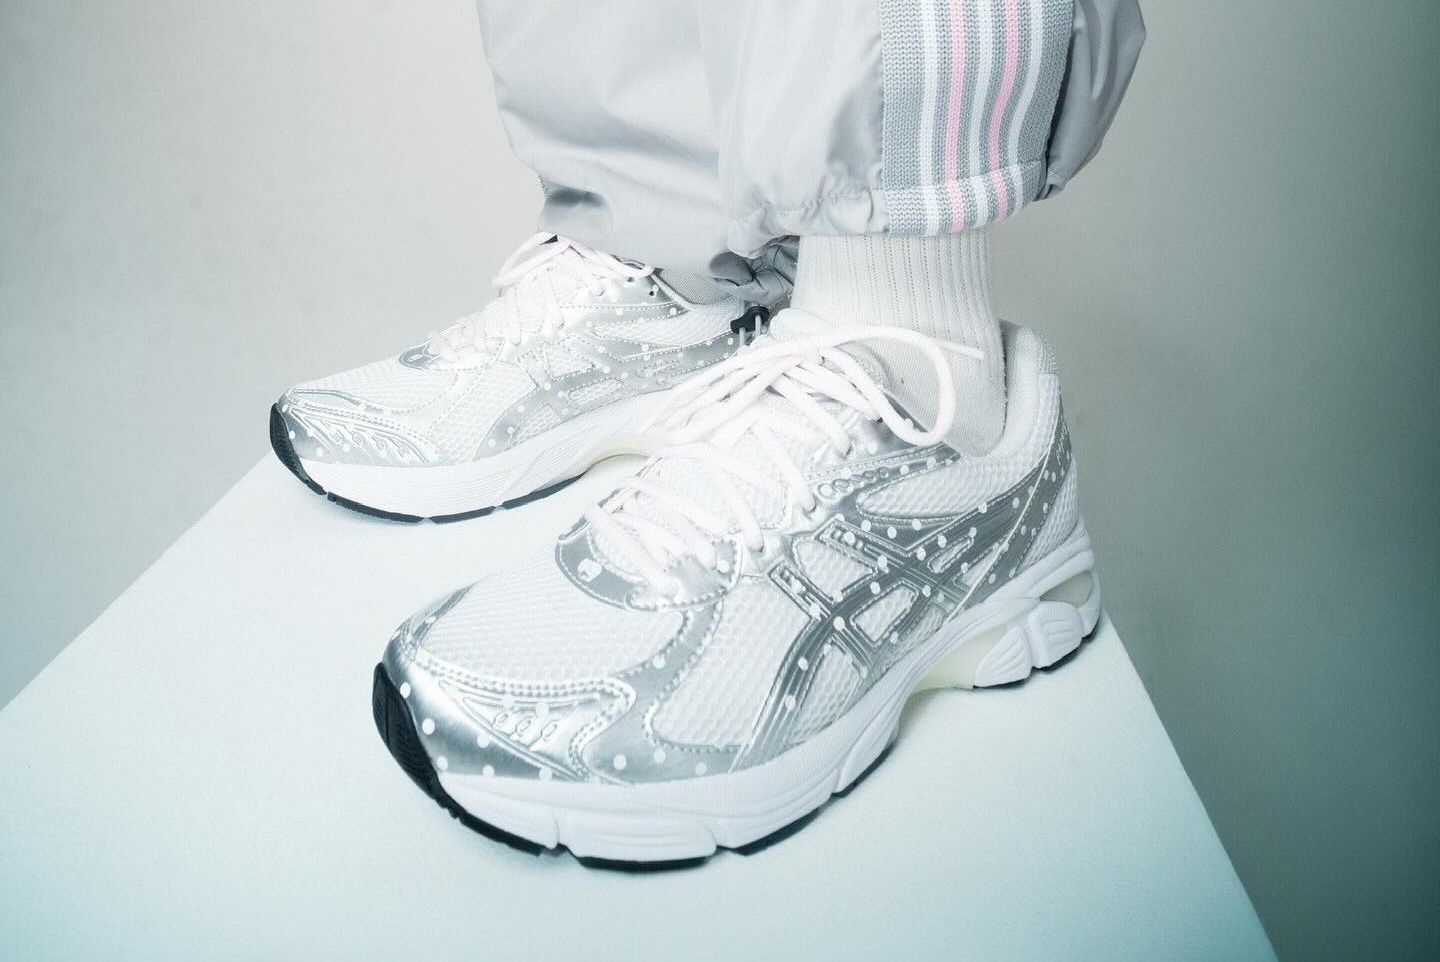 The Papergirl Paris x BEAMS x ASICS GT-2160 Drops in the U.S. Soon